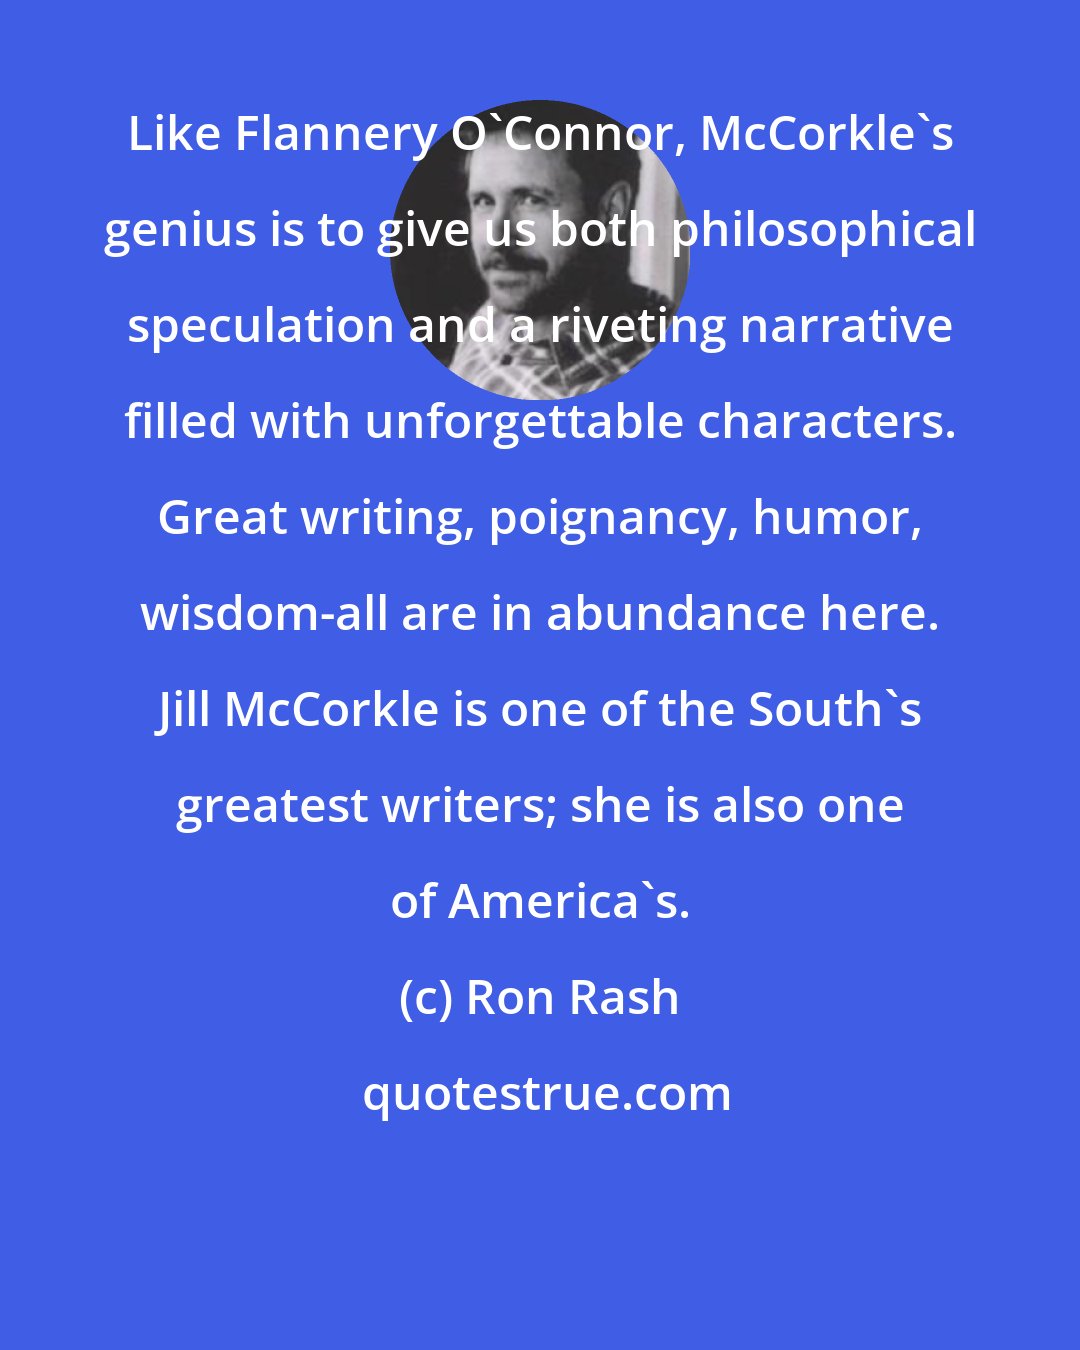 Ron Rash: Like Flannery O'Connor, McCorkle's genius is to give us both philosophical speculation and a riveting narrative filled with unforgettable characters. Great writing, poignancy, humor, wisdom-all are in abundance here. Jill McCorkle is one of the South's greatest writers; she is also one of America's.